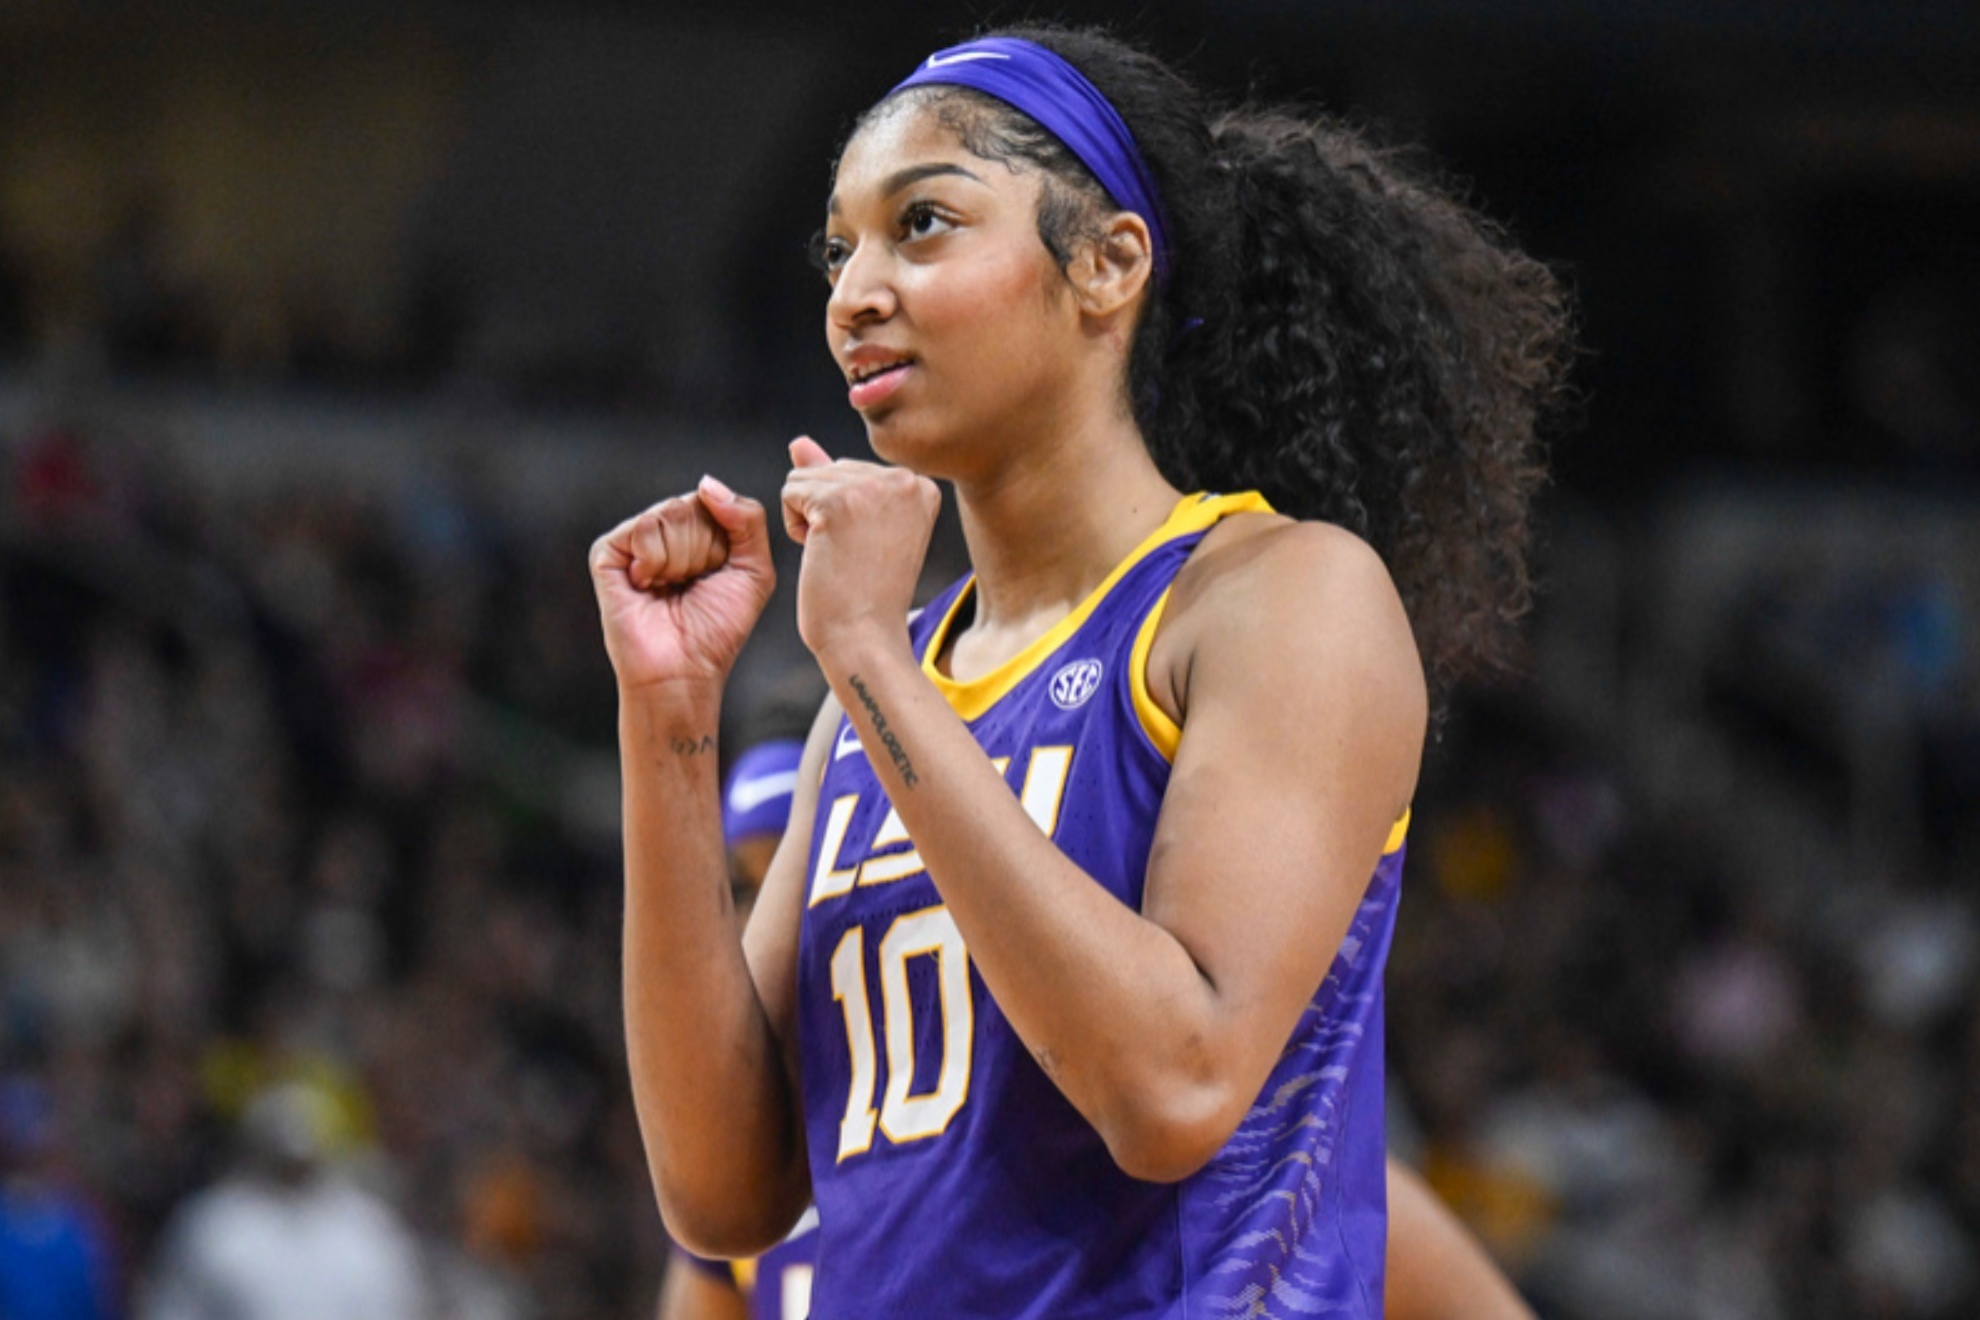 angel reese wnba draft: how much will she make in the wnba and what team is expected to draft her?